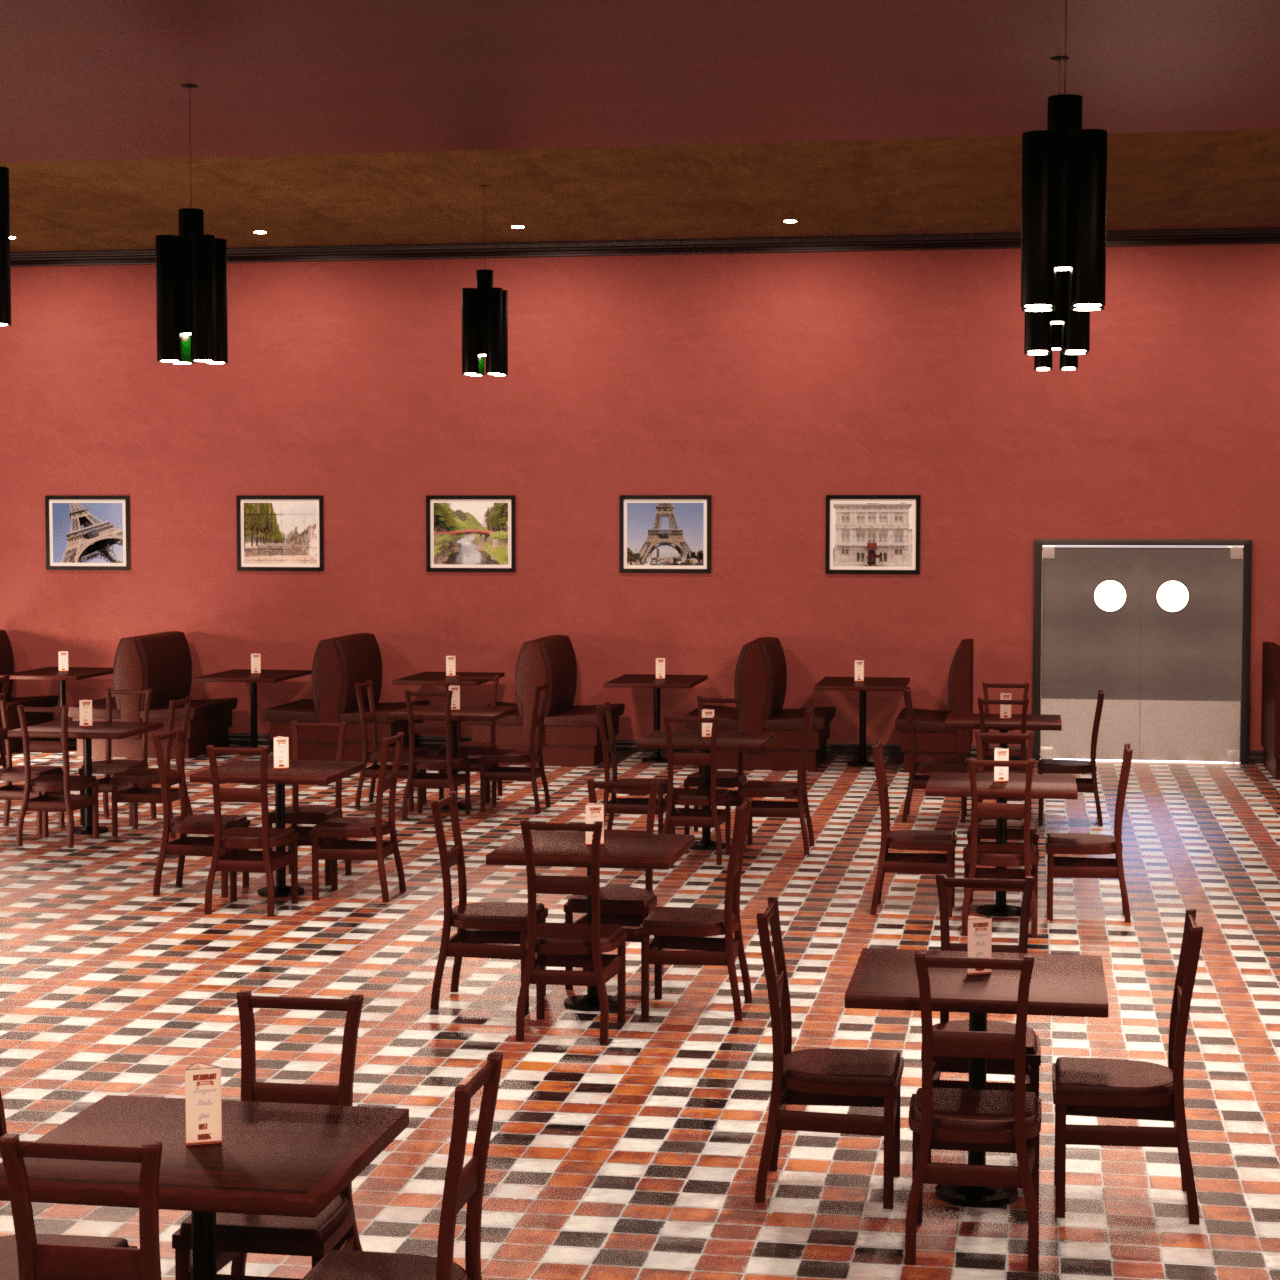 Another perspective showing the interior of the restaurant